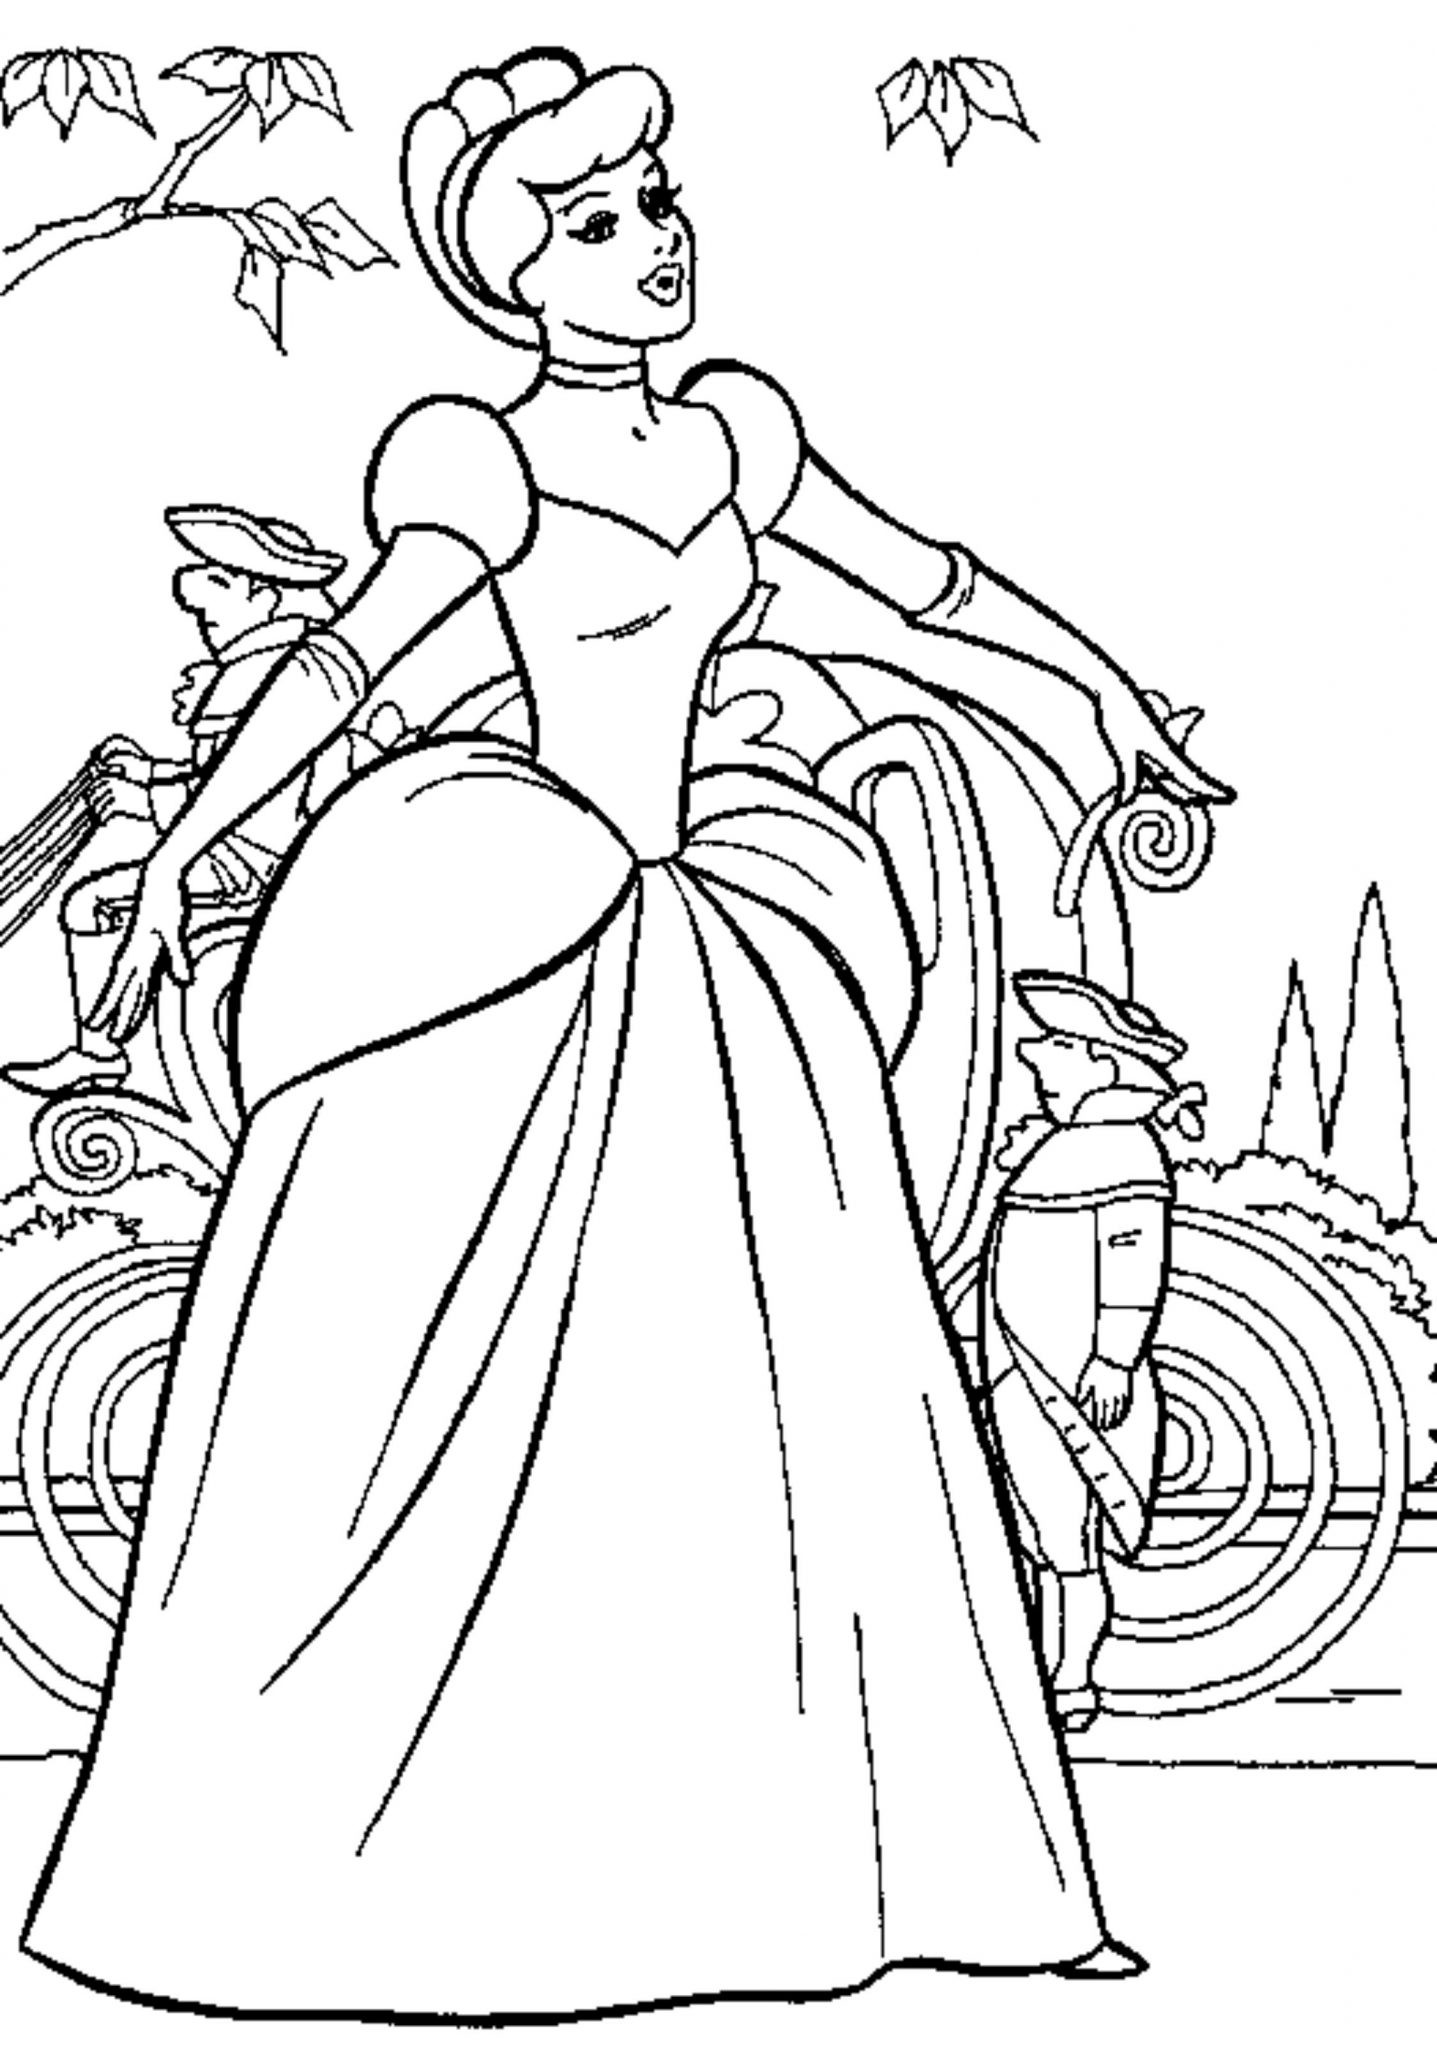 Free Princess Coloring Pages
 Print & Download Princess Coloring Pages Support The